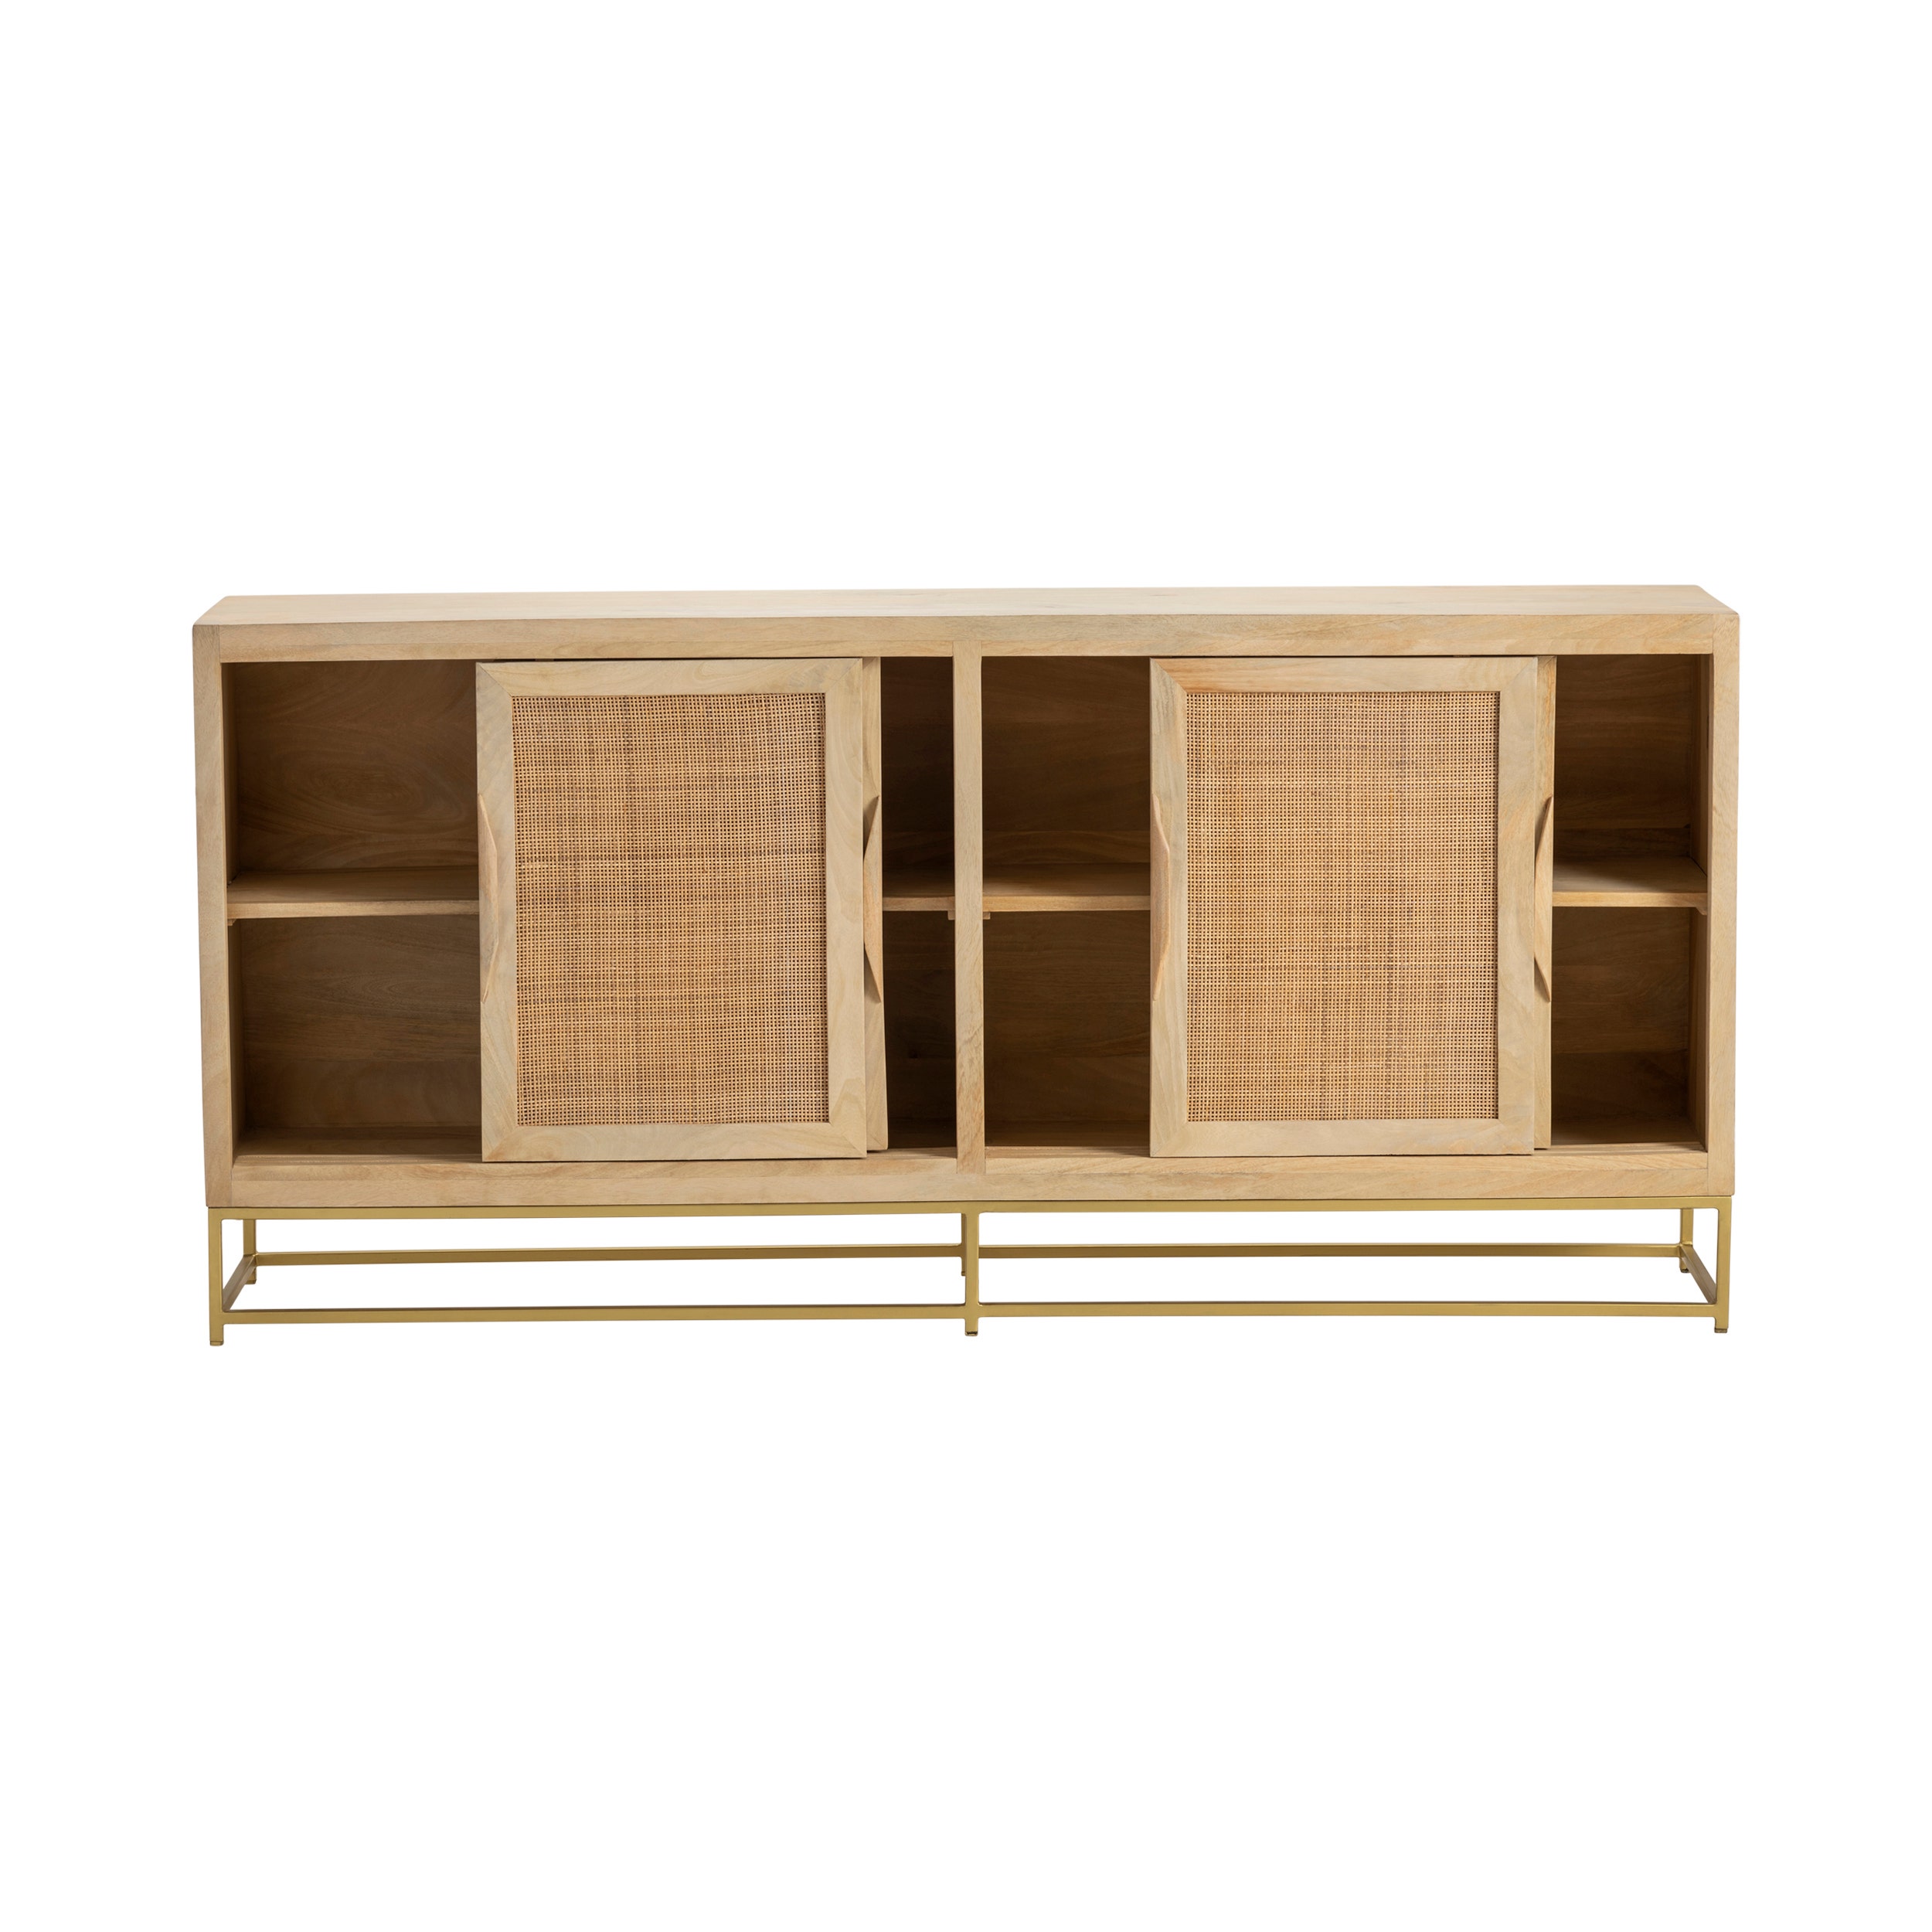 Biscayne Sideboard - Crestview Collection